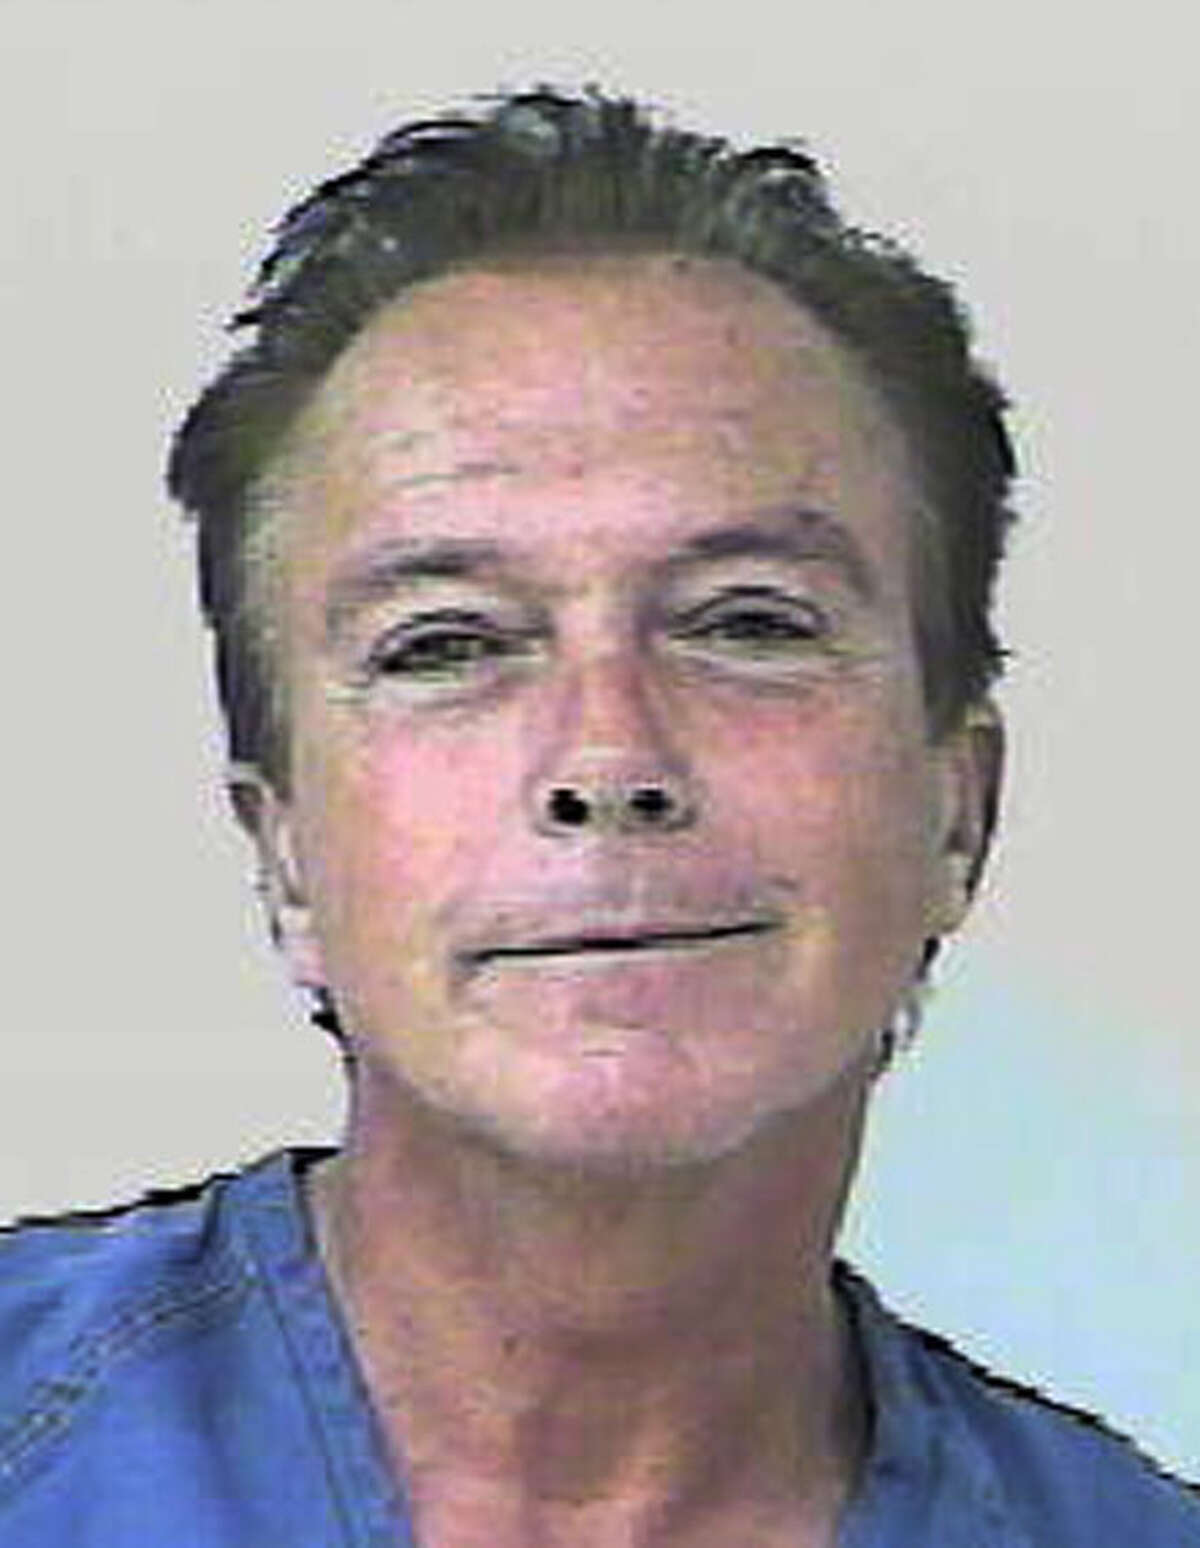 In this undated photo provided by the Florida Highway Patrol, former "Partridge Family" heartthrob David?ÇCassidy is shown. According to the Florida Highway Patrol, Cassidy's car was stopped around 6 p.m. Wednesday, Nov. 3, 2010, on the Florida Turnpike for weaving and nearly causing an accident. The FHP report states that Cassidy failed a field sobriety test, and breath tests at the St. Lucie County jail showed his blood-alcohol content at 0.139 and 0.141, above Florida's legal limit of 0.08. (AP Photo/Florida Highway Patrol) ORG XMIT: MER2014013110540199